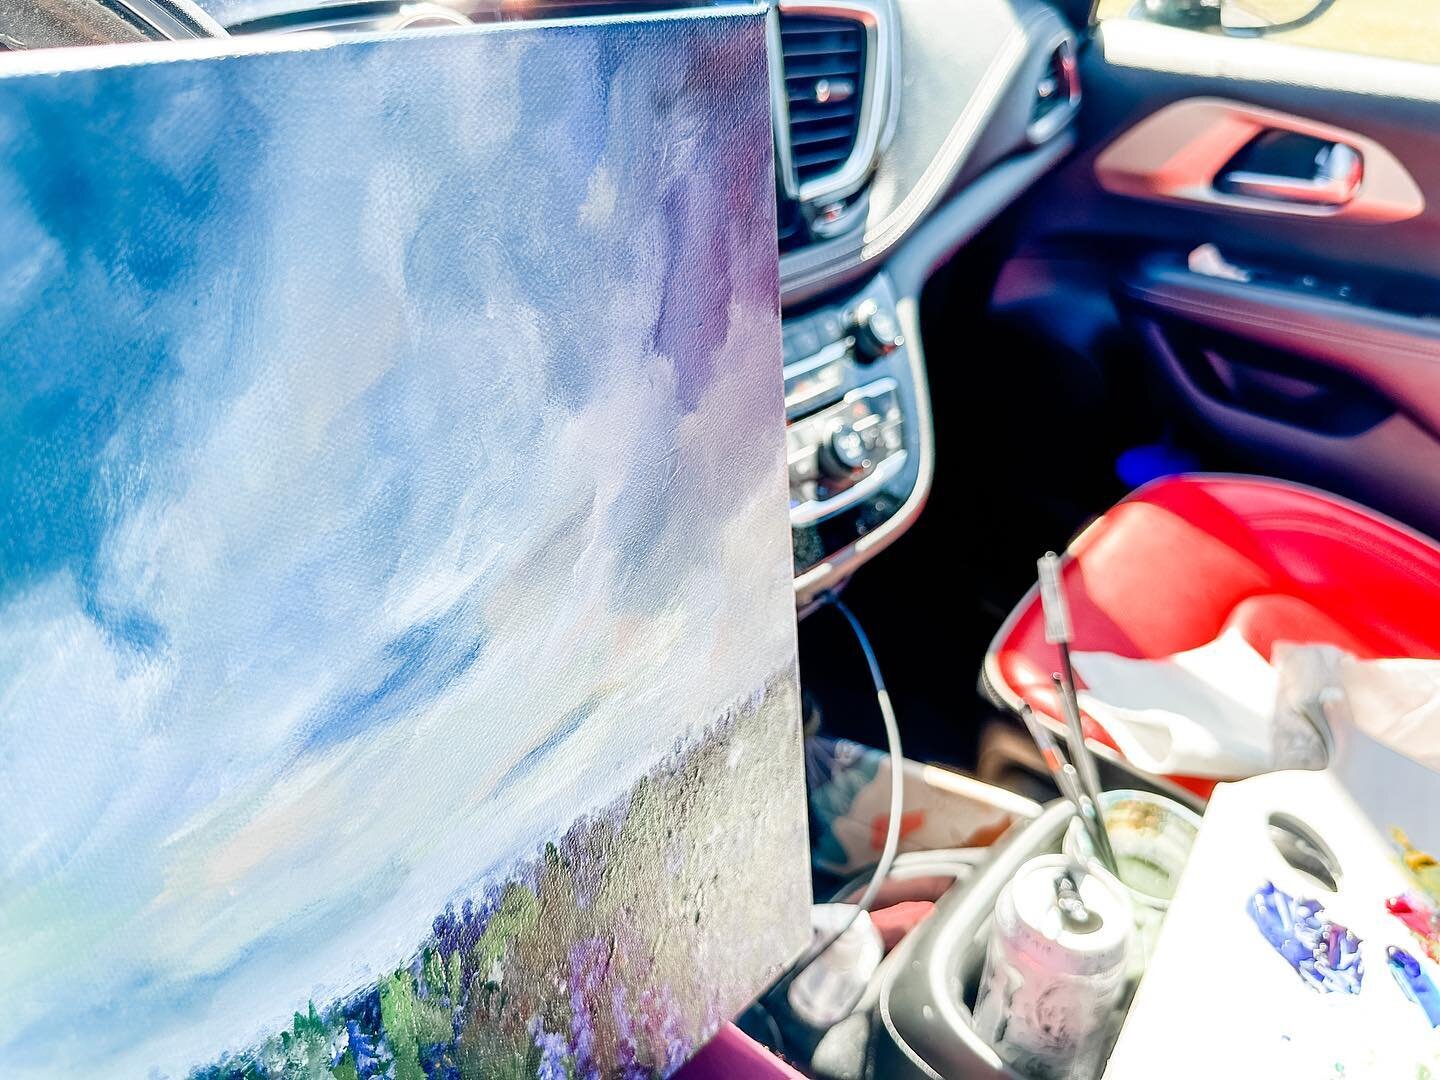 The car becomes a studio when you&rsquo;re mommin&rsquo; with 2 littles and on a deadline. 👀 🤍 Stay tuned for some exciting Wildflower news!! 🙌 🤫

💻 Shop online anytime at www.wildflowerartistry.com
&bull;&bull;&bull;&bull;&bull;
#artist #locala